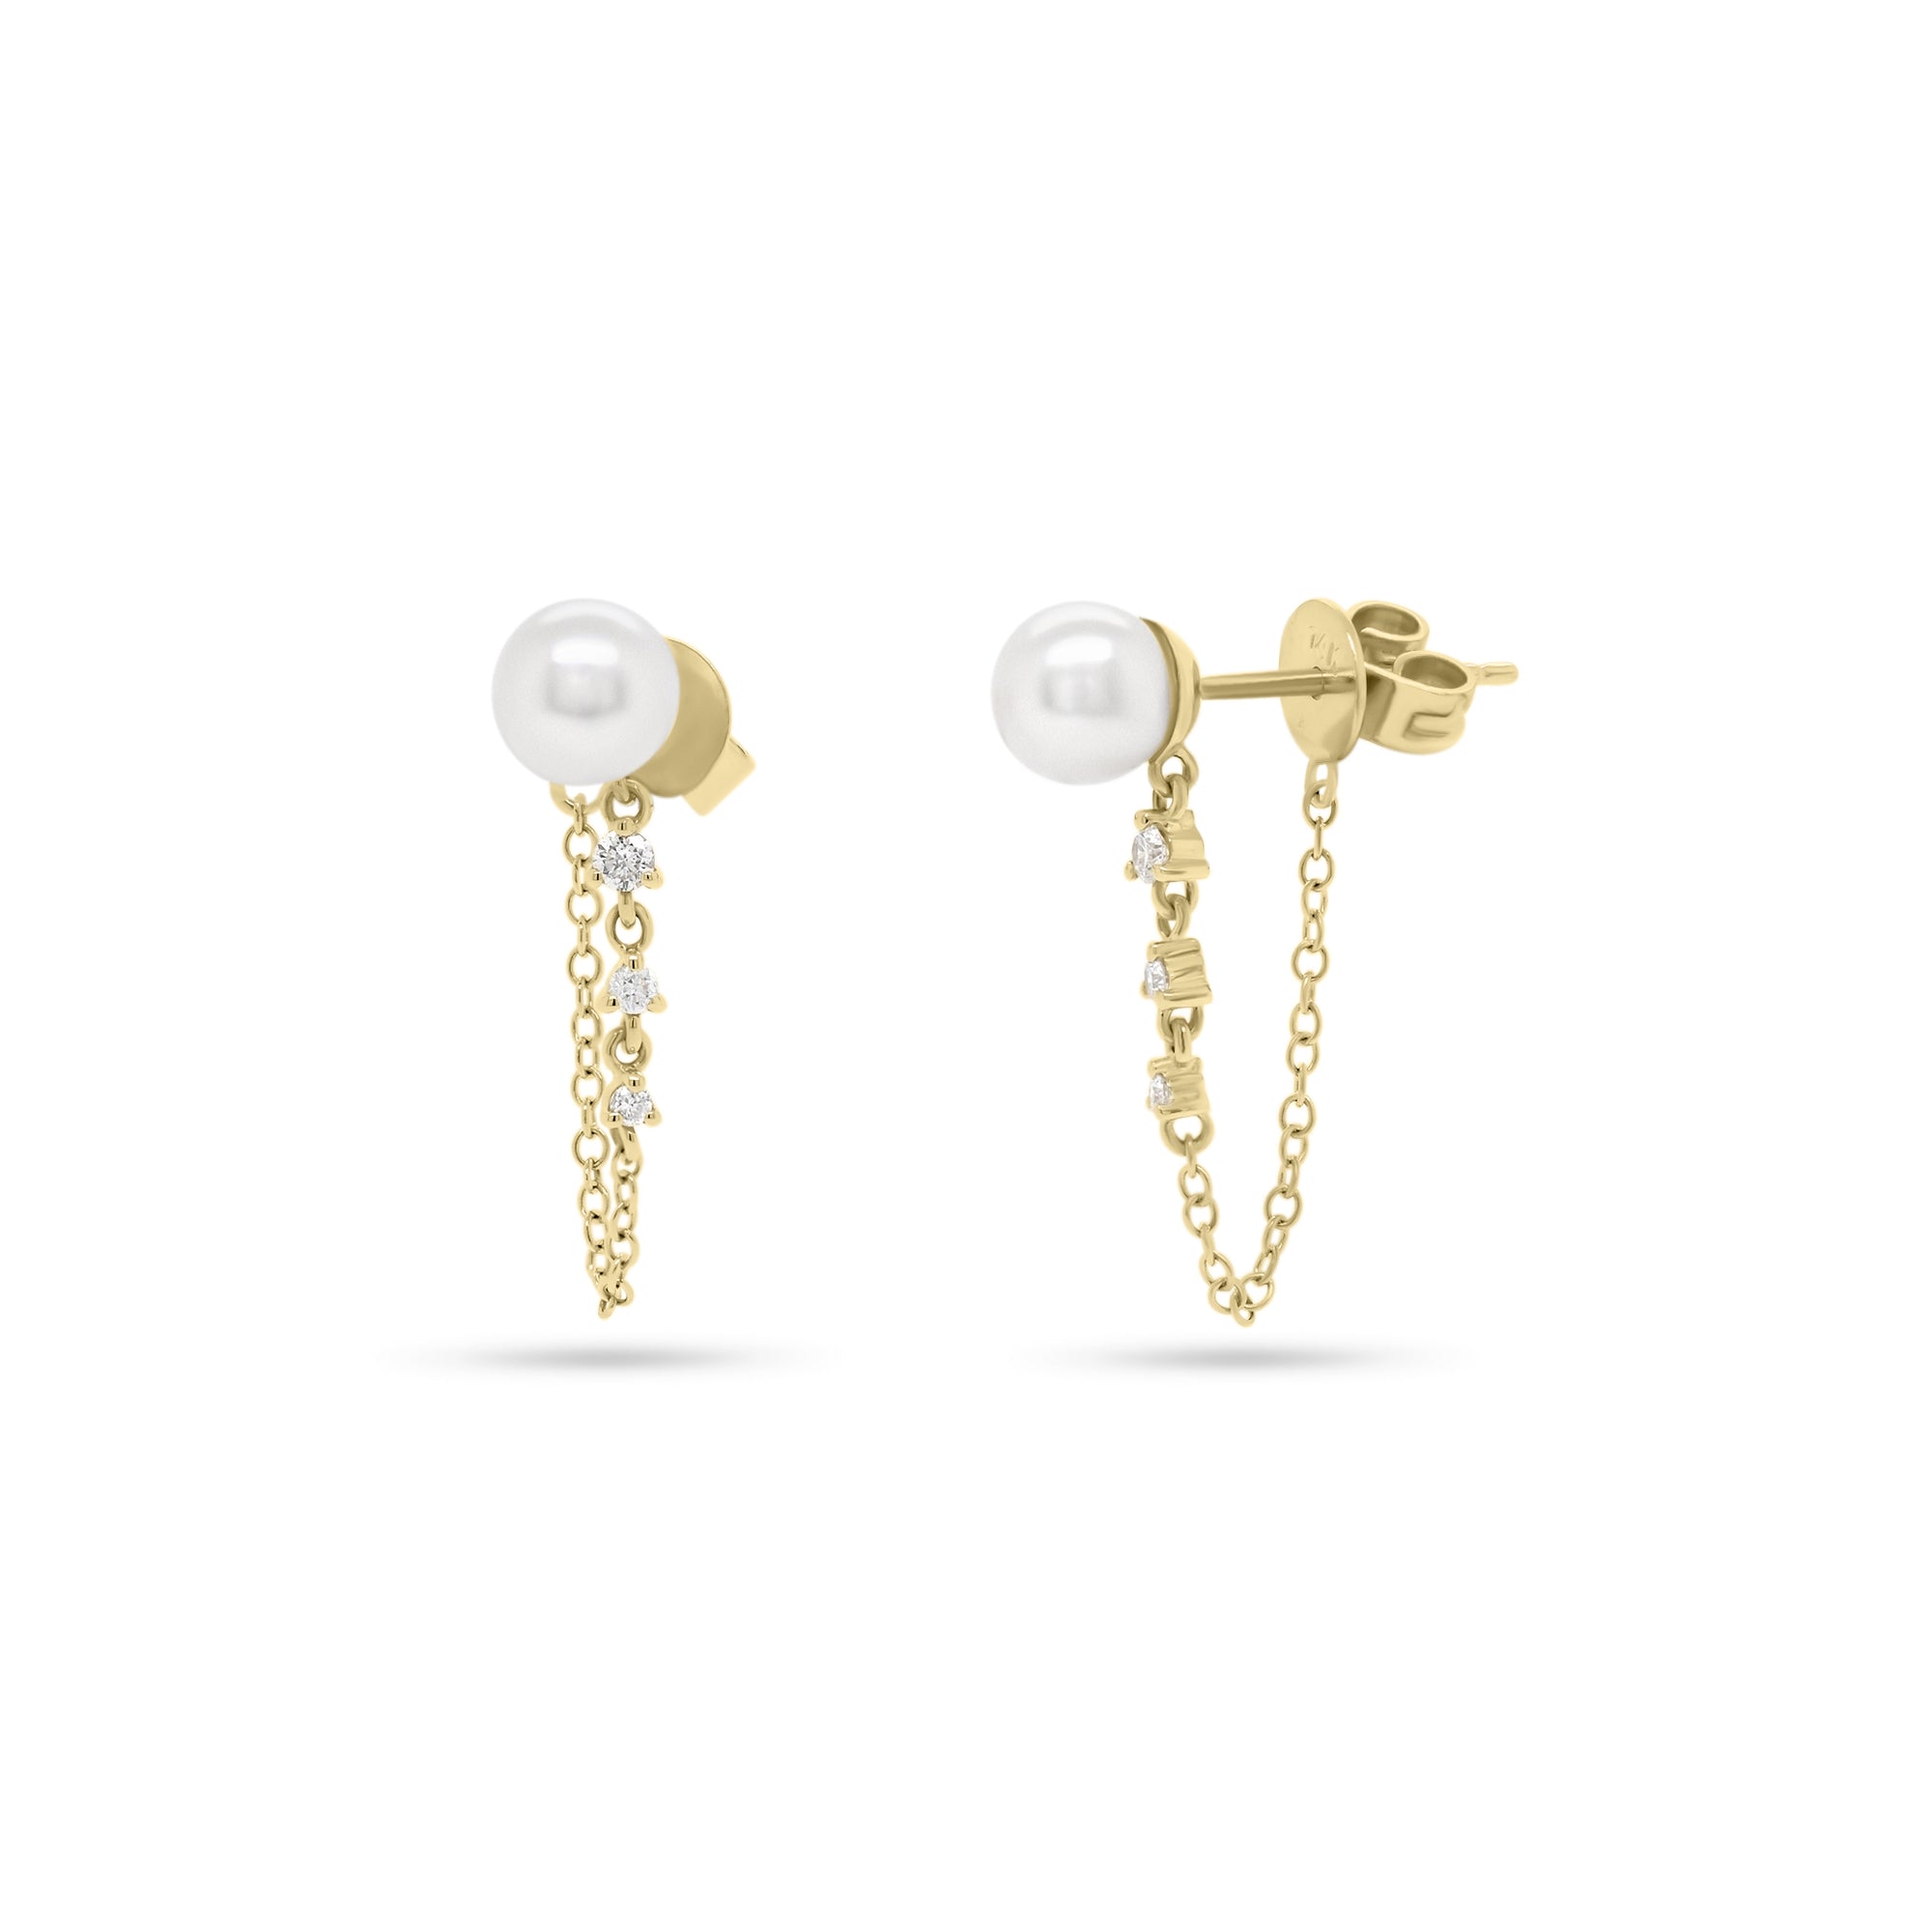 Pearl & Diamond Front-Back Earrings - 14K yellow gold weighing 1.28 grams - 6 round diamonds totaling 0.11 carats - 2 pearls